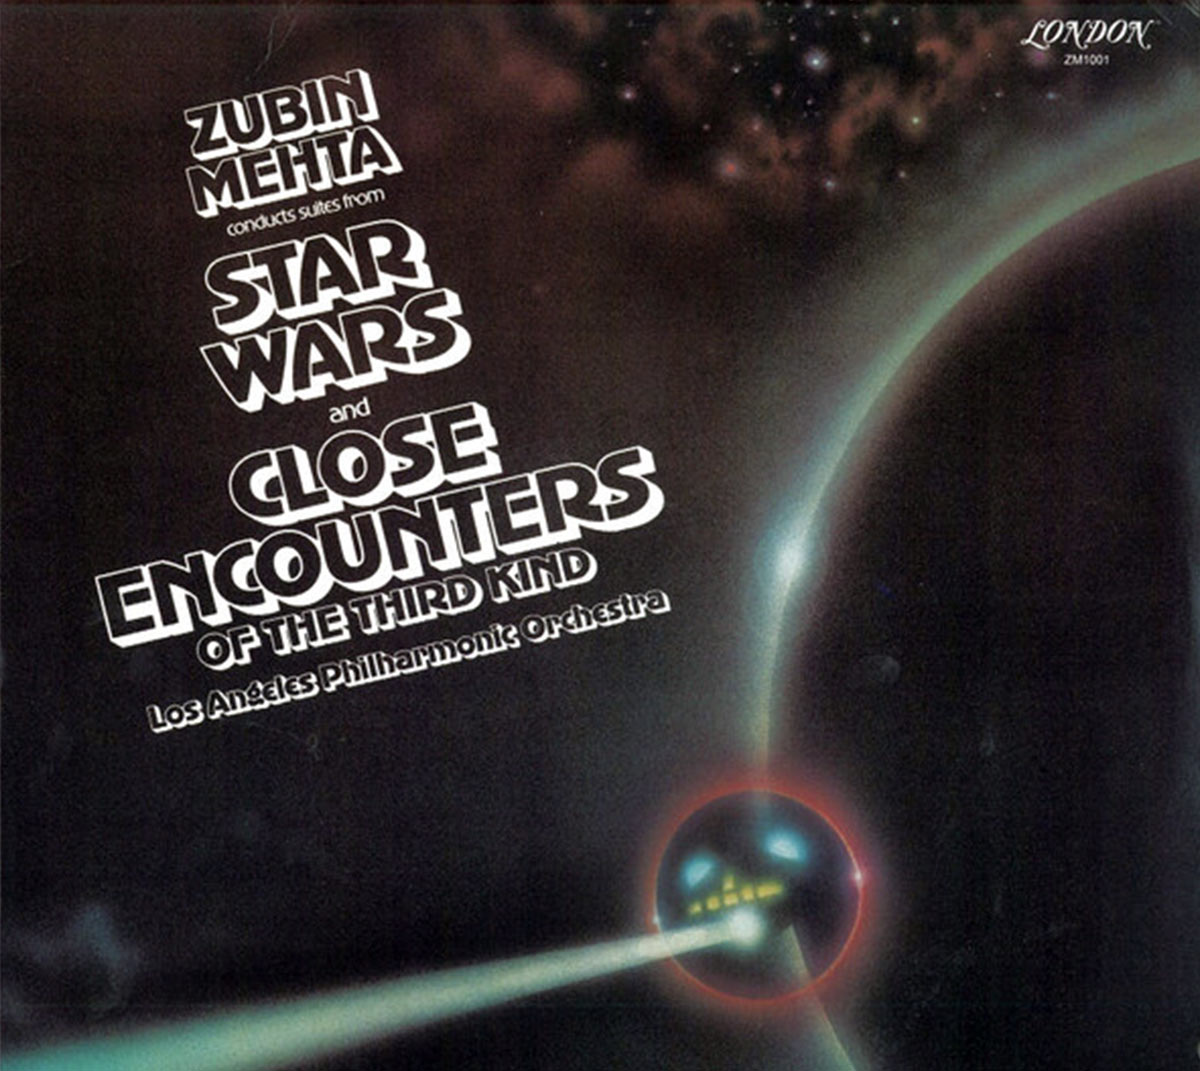 Zubin Mehta and The Los Angeles Philharmonic Orchestra, Star Wars & Close Encounters of the Third Kind